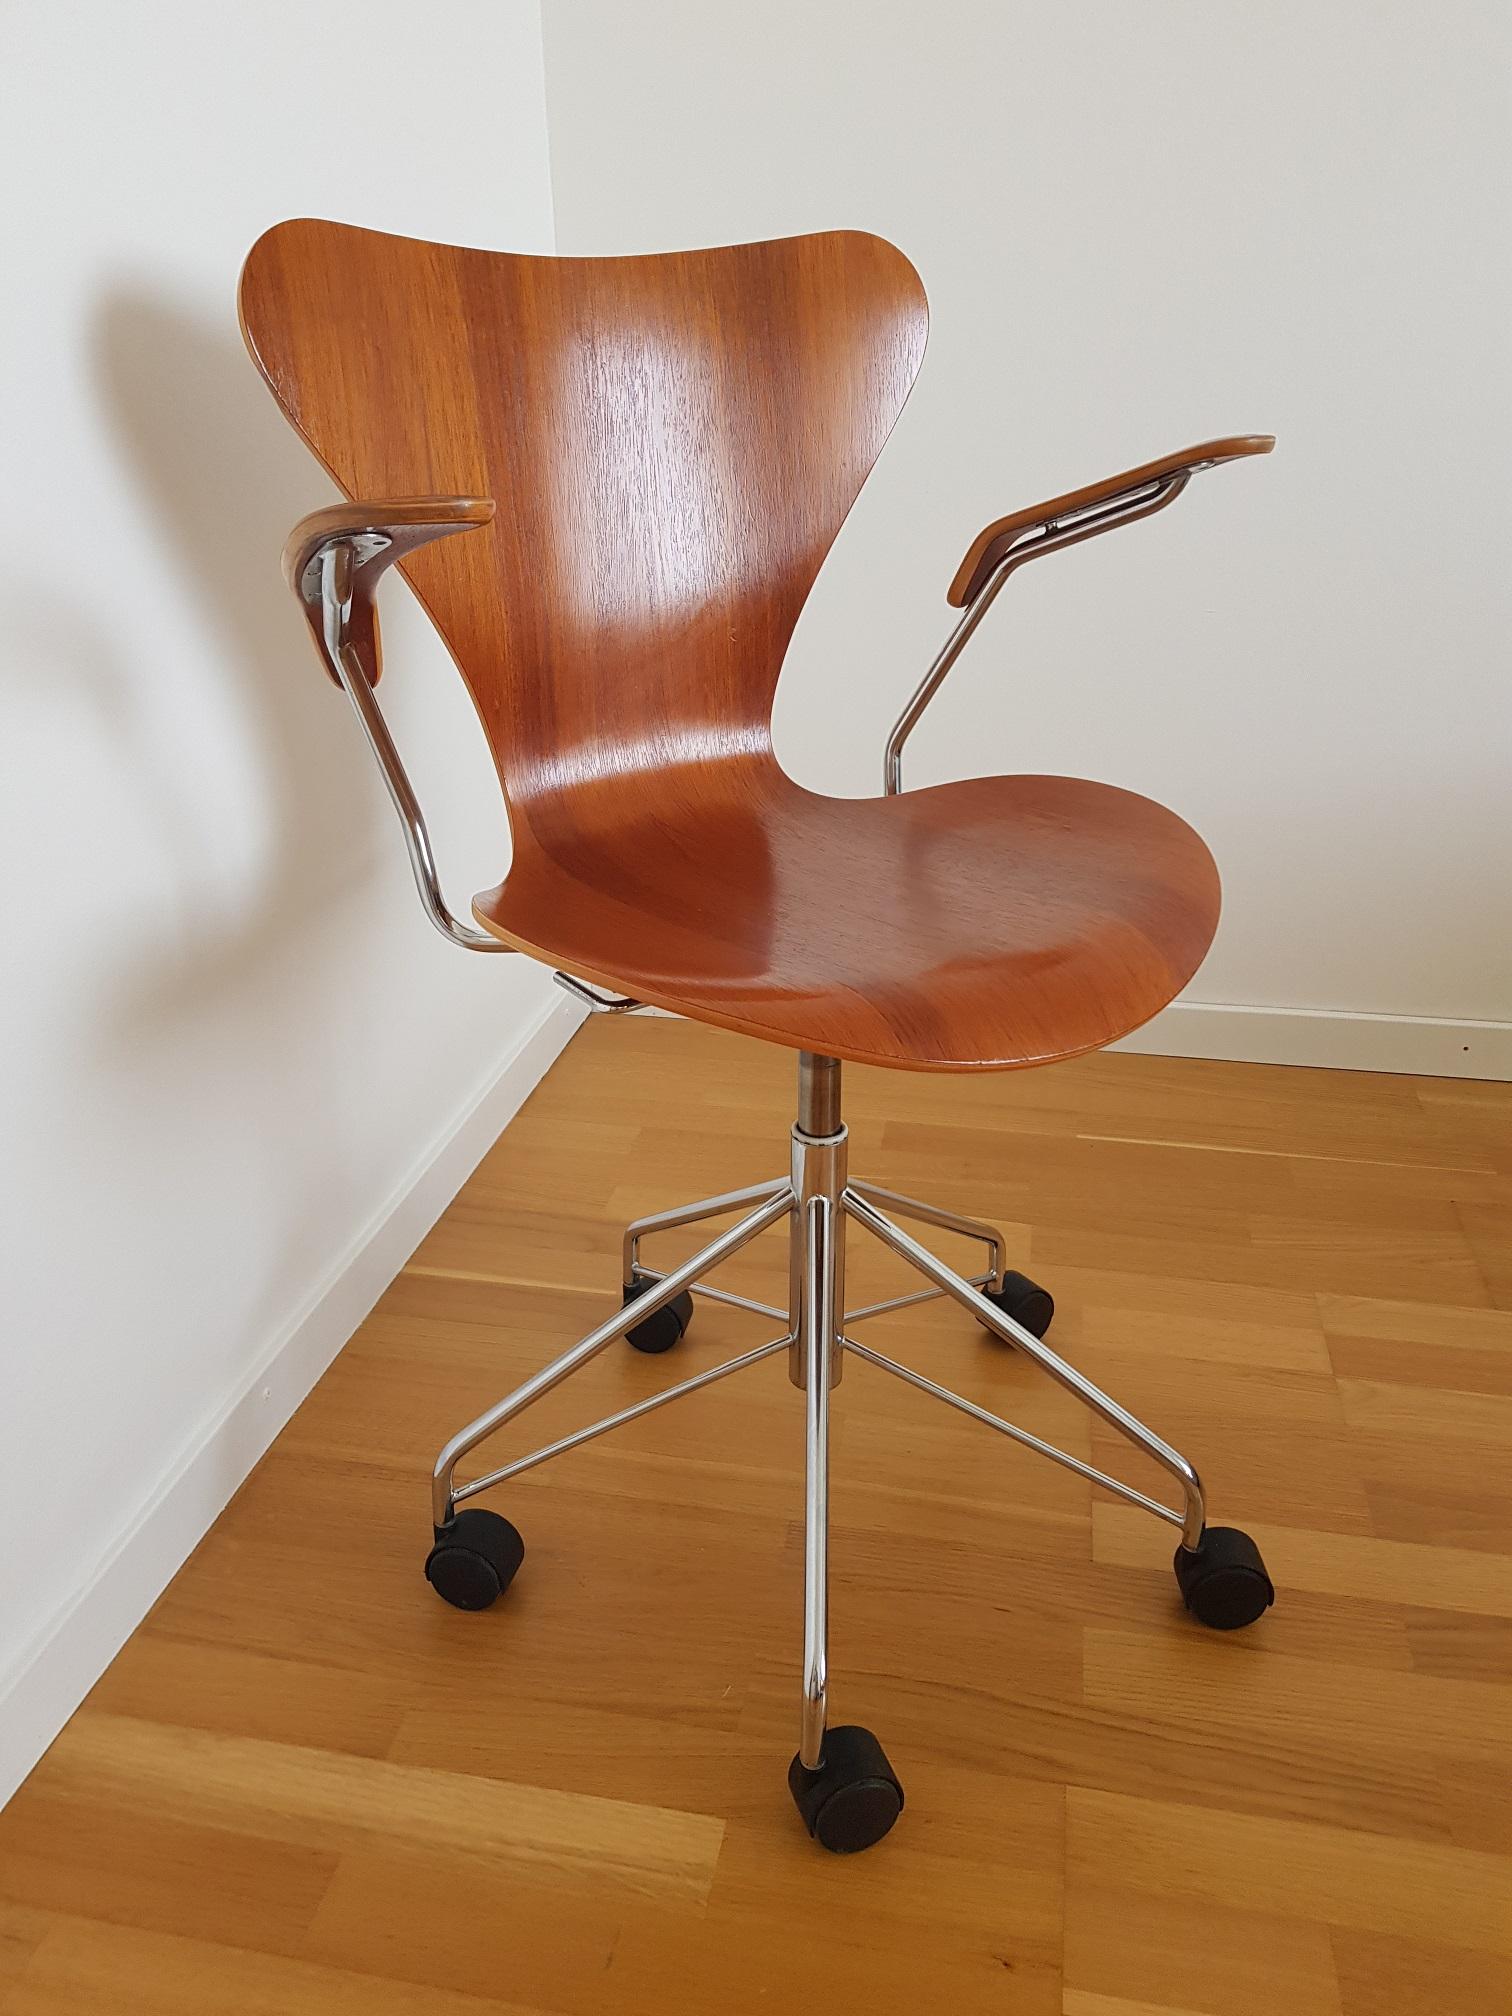 Series 7 office chair in teak and chromed base with 5 wheels. No longer in production in teak. The seating position is adjustable and can be lifted or lowered (46-55 cm). Produced in Denmark 1997 by Fritz Hansen. This desk chair is one of the most